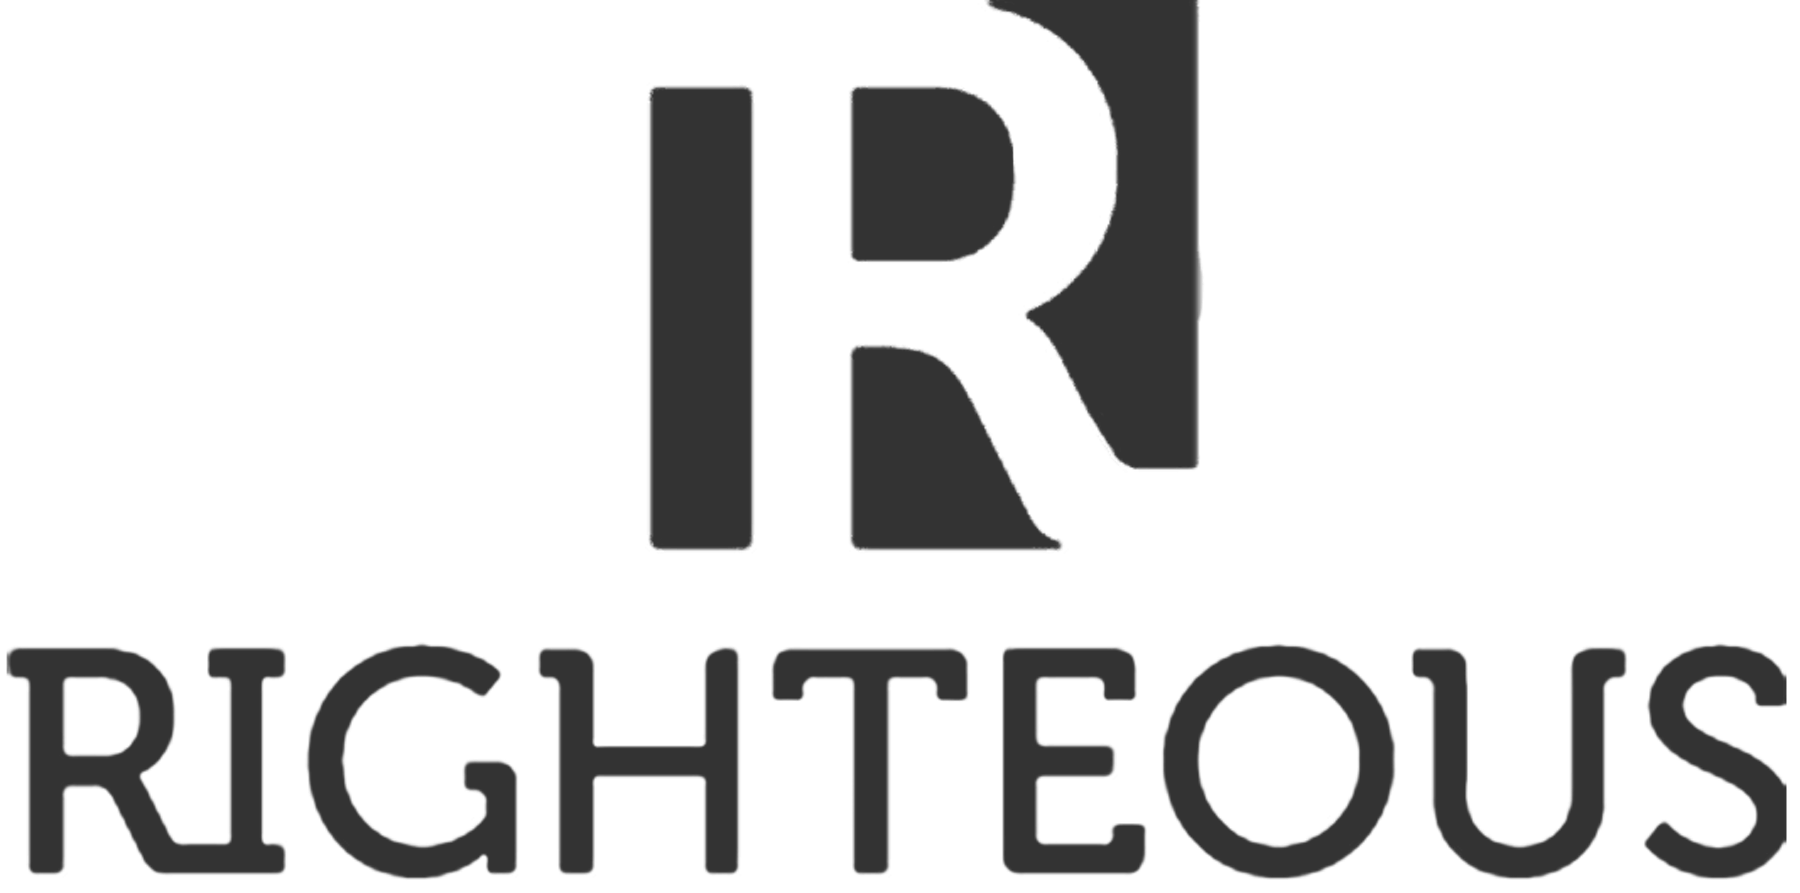 Righteous Clothing Logo black png